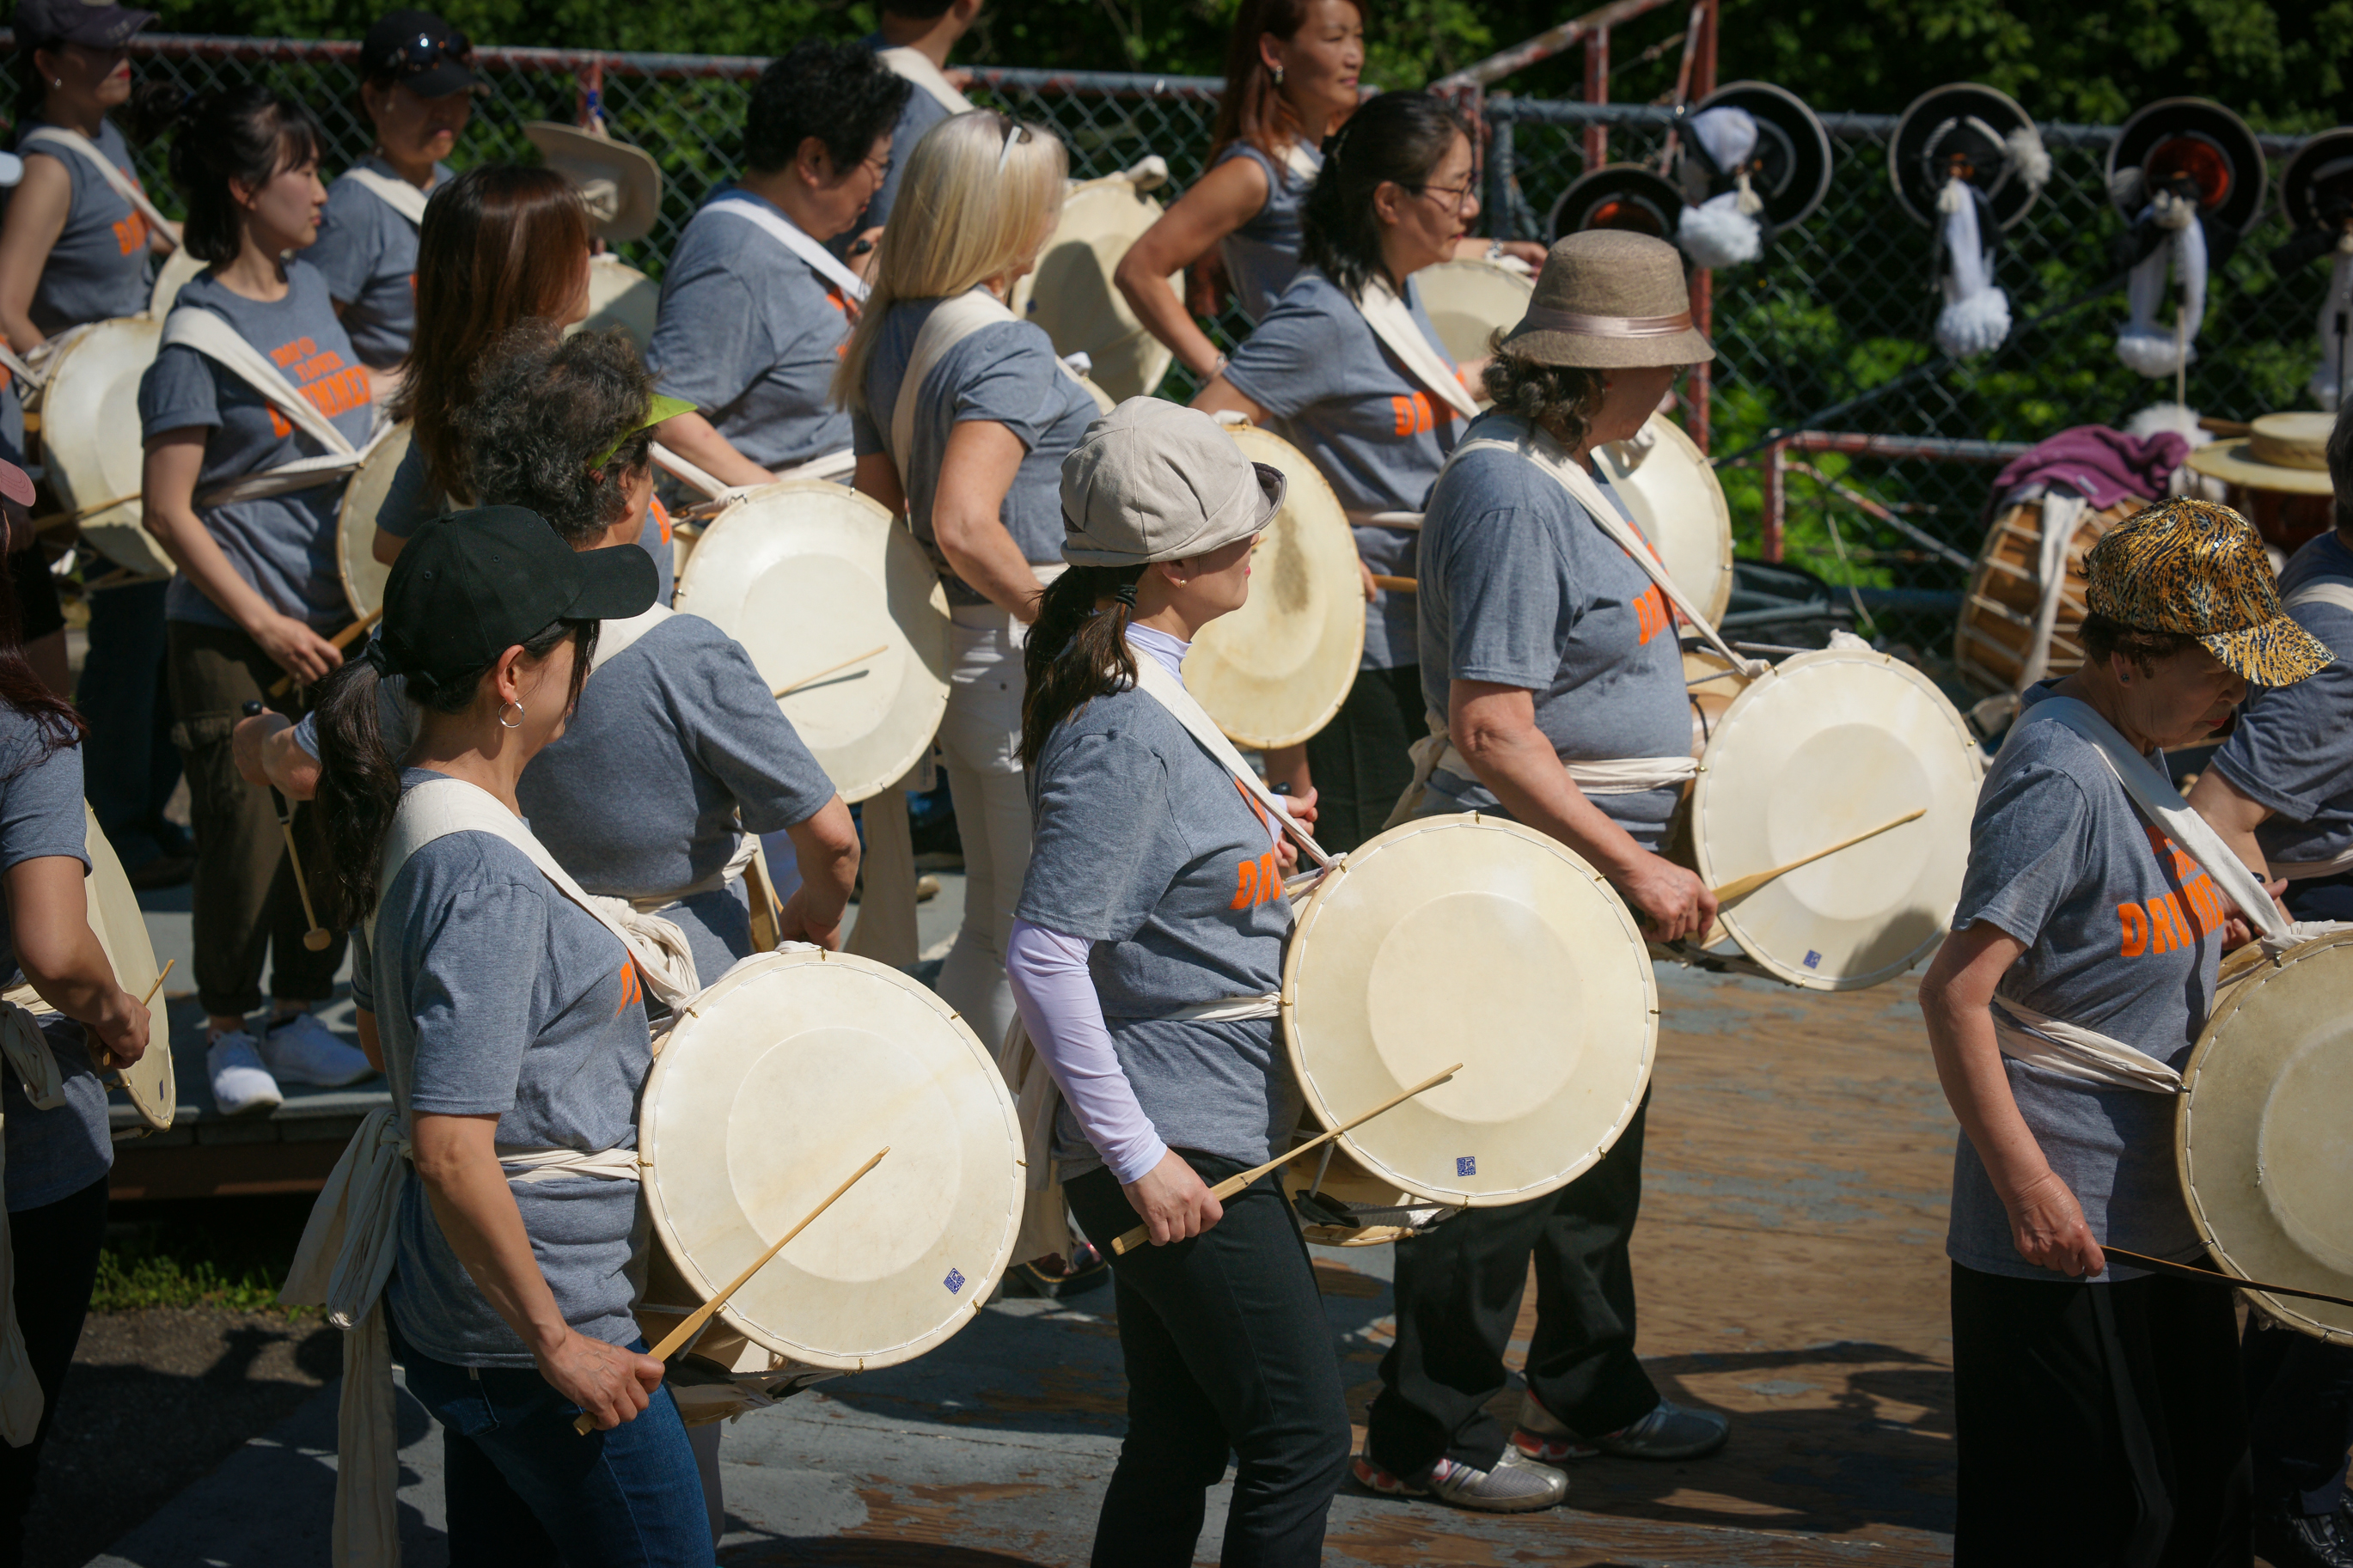 A group of drummers stand and play in unison.